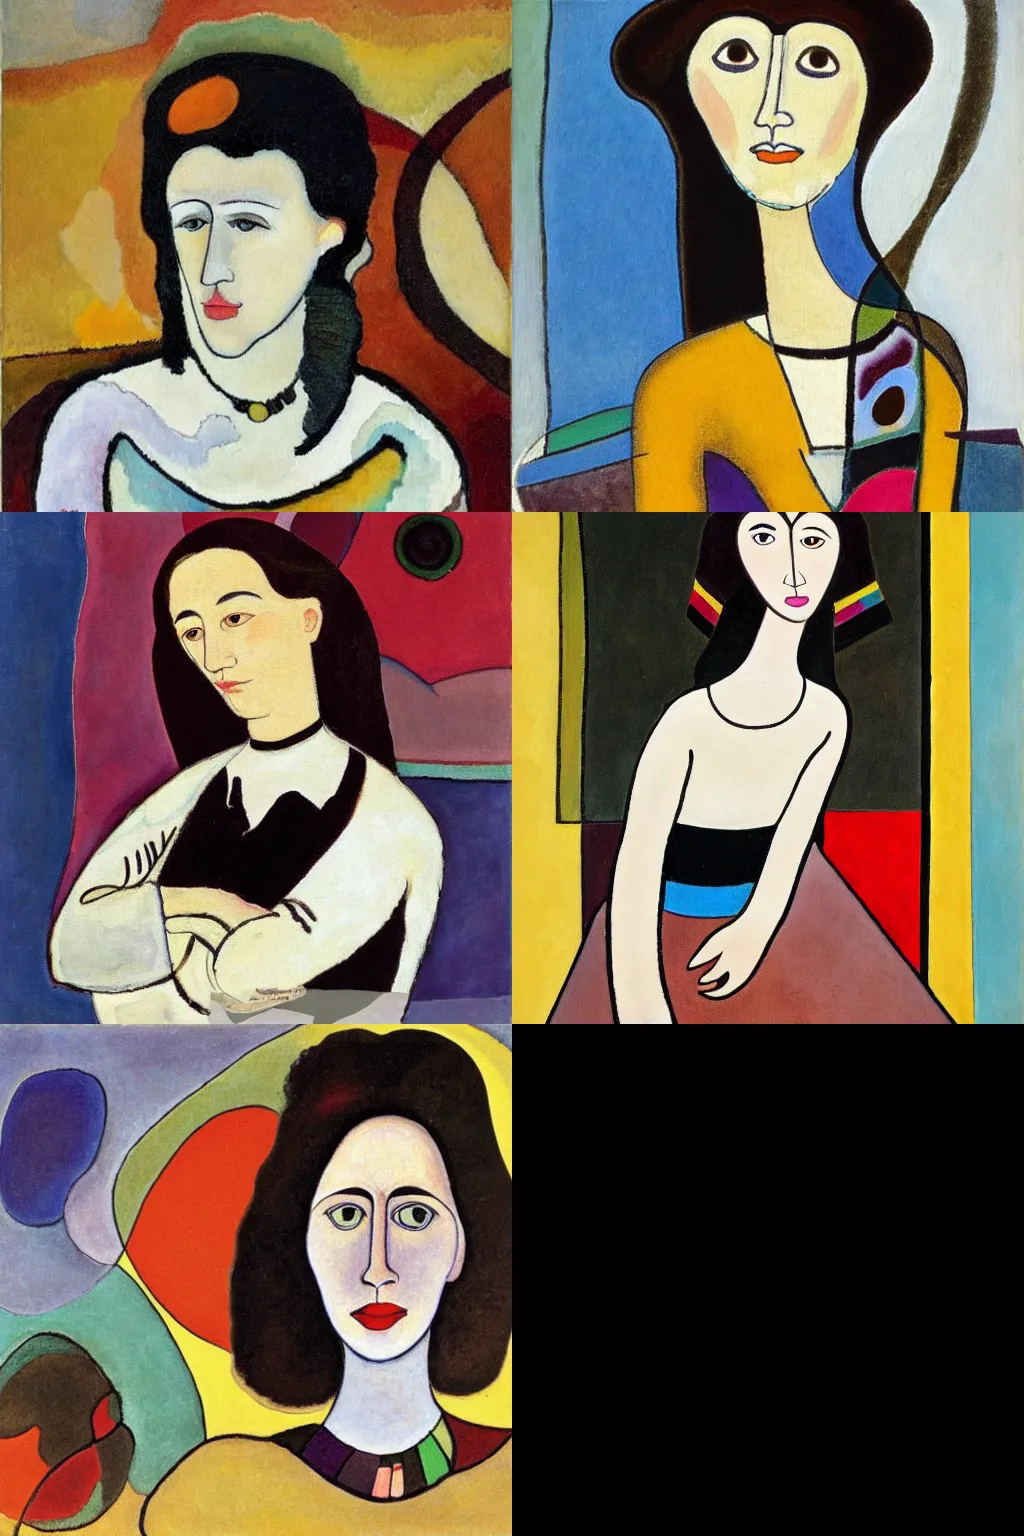 Prompt: an hd painting of a woman by wassily kandinsky. she has straight long dark brown hair, parted in the middle. she has large dark brown eyes, a small refined nose, and thin lips. she is wearing a sleeveless white blouse, a pair of dark brown capris, and black loafers.